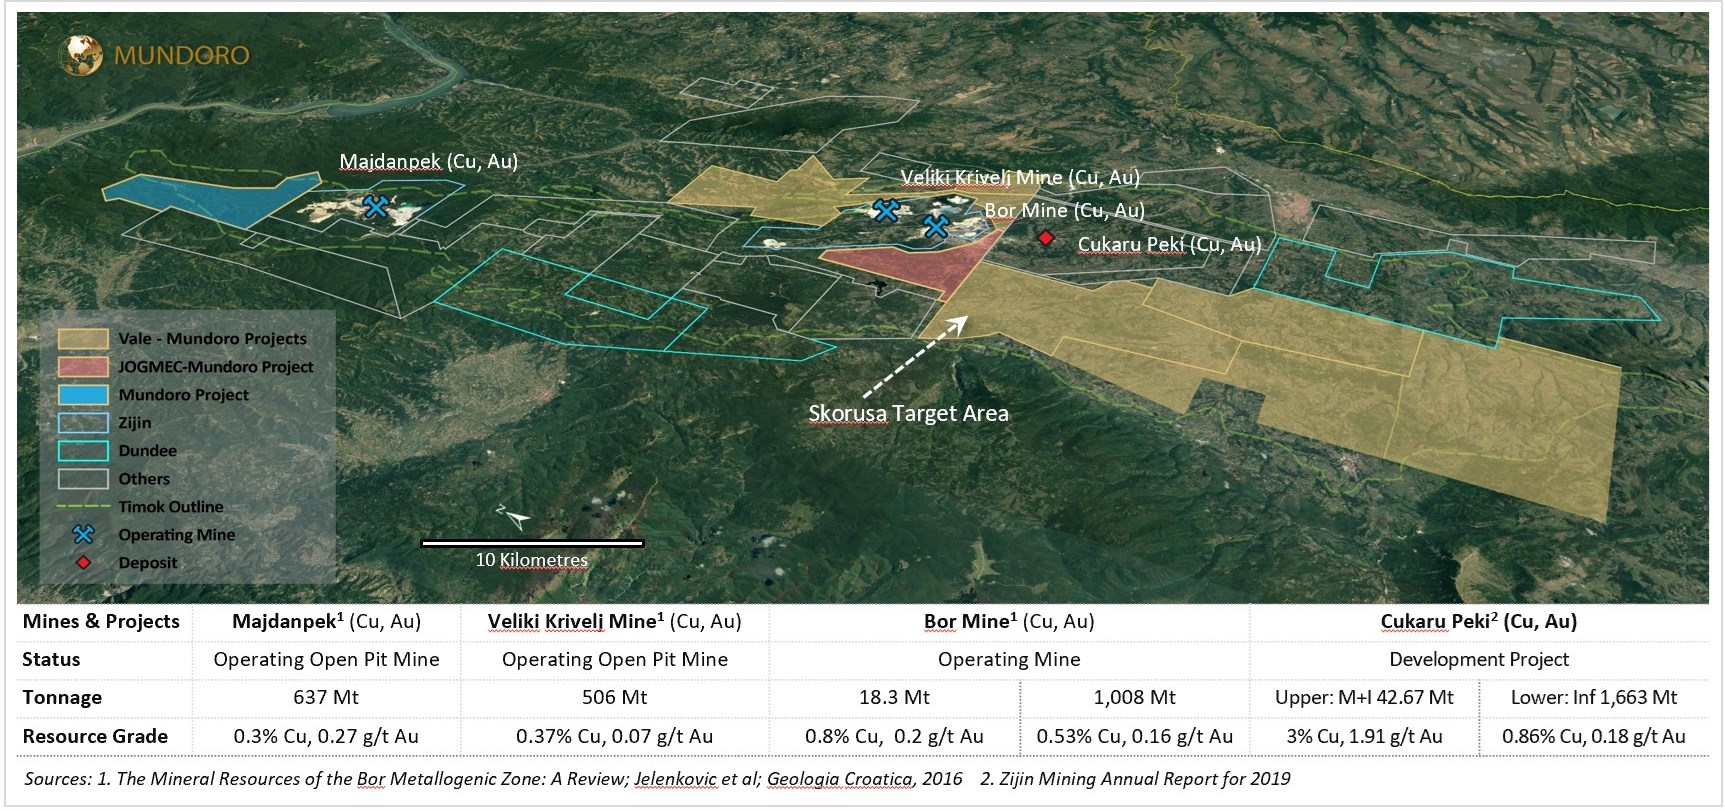 Mundoro Commences Drill Program on Vale Project in Timok Serbia